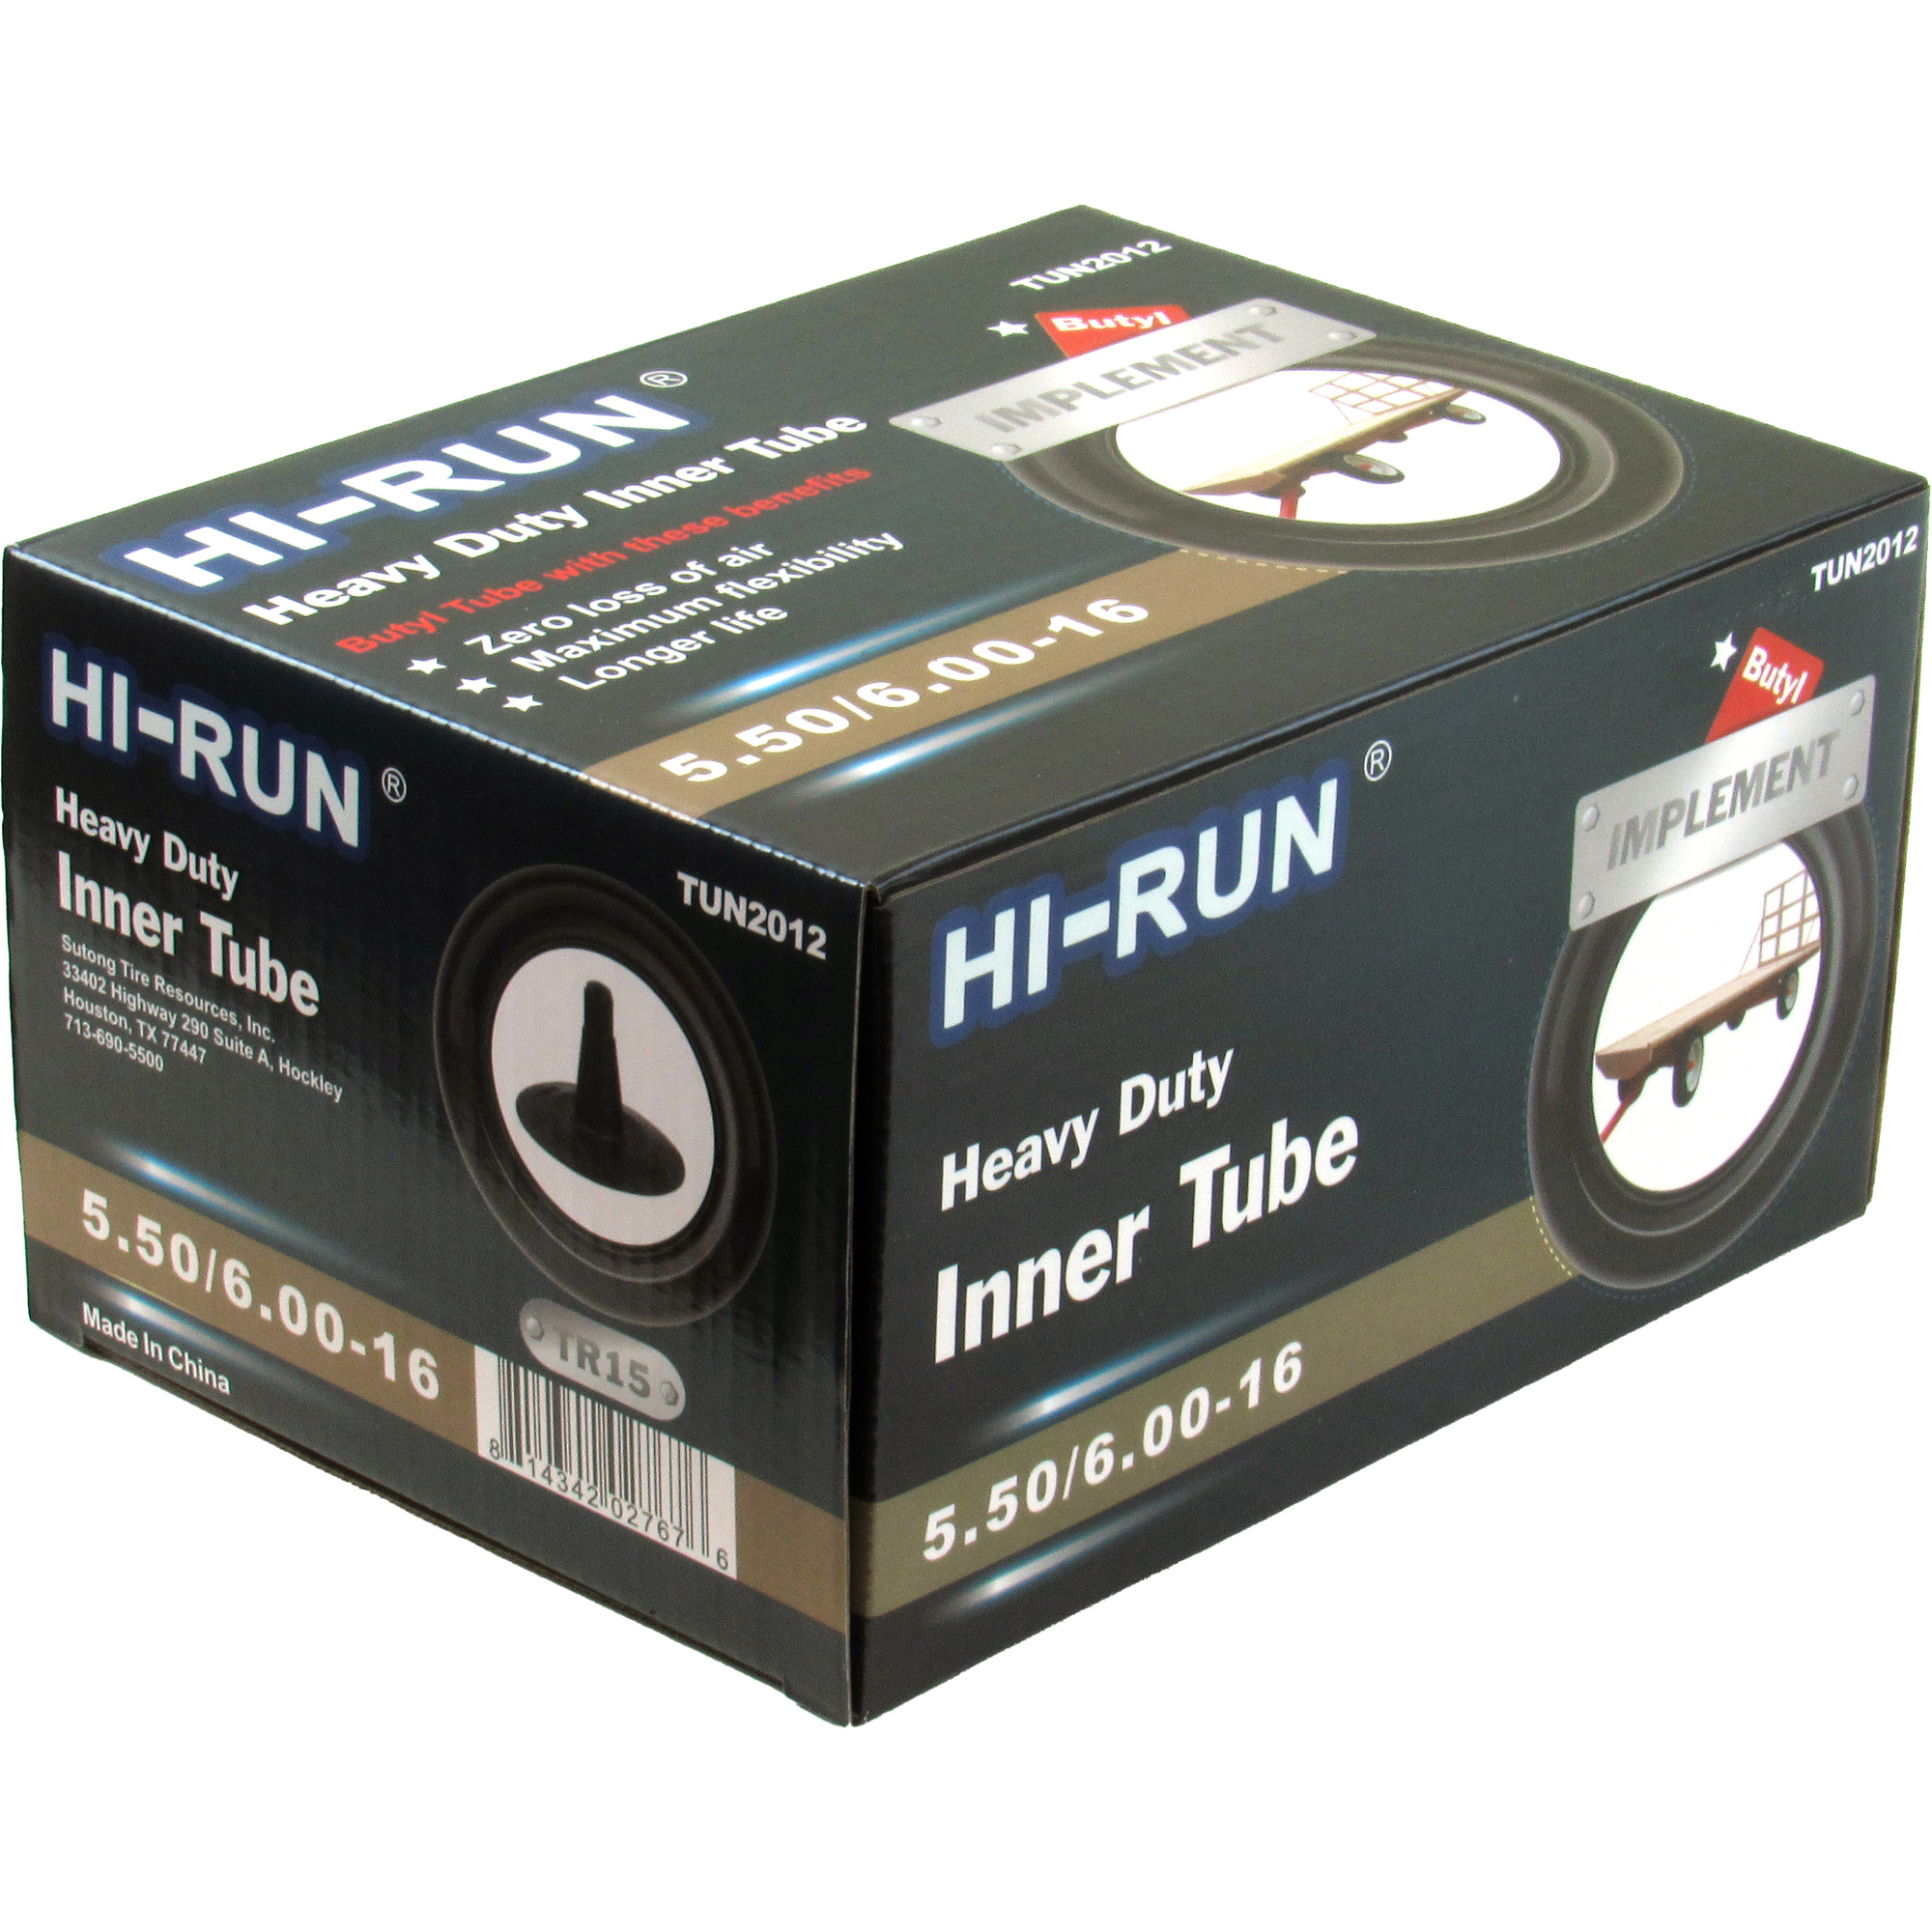 HI-RUN, Tube 5.50/6.00-16 (TR15) Float Implement, Fits Rim Size 16 in, Included (qty.) 1 Model TUN2012